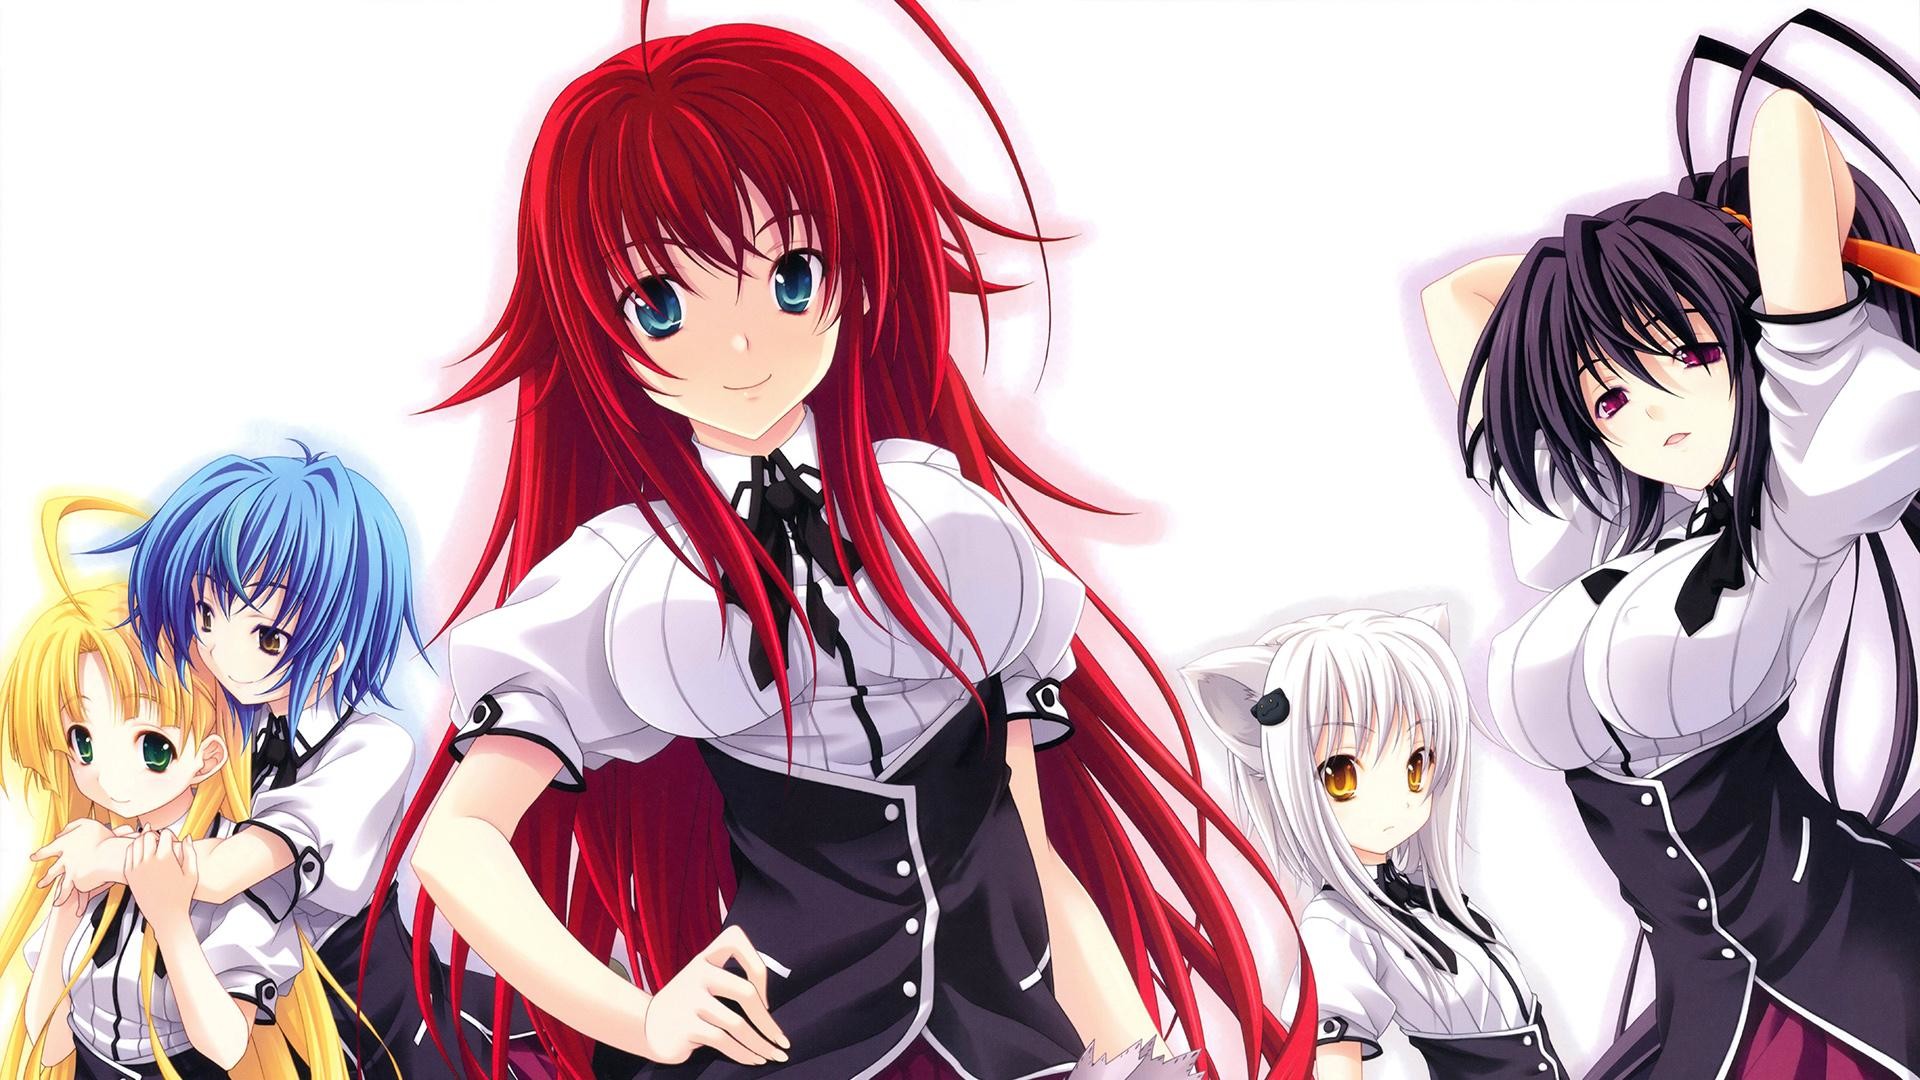 1920x1080 HD Quality Wallpaper | Collection: Anime,  High School DxD